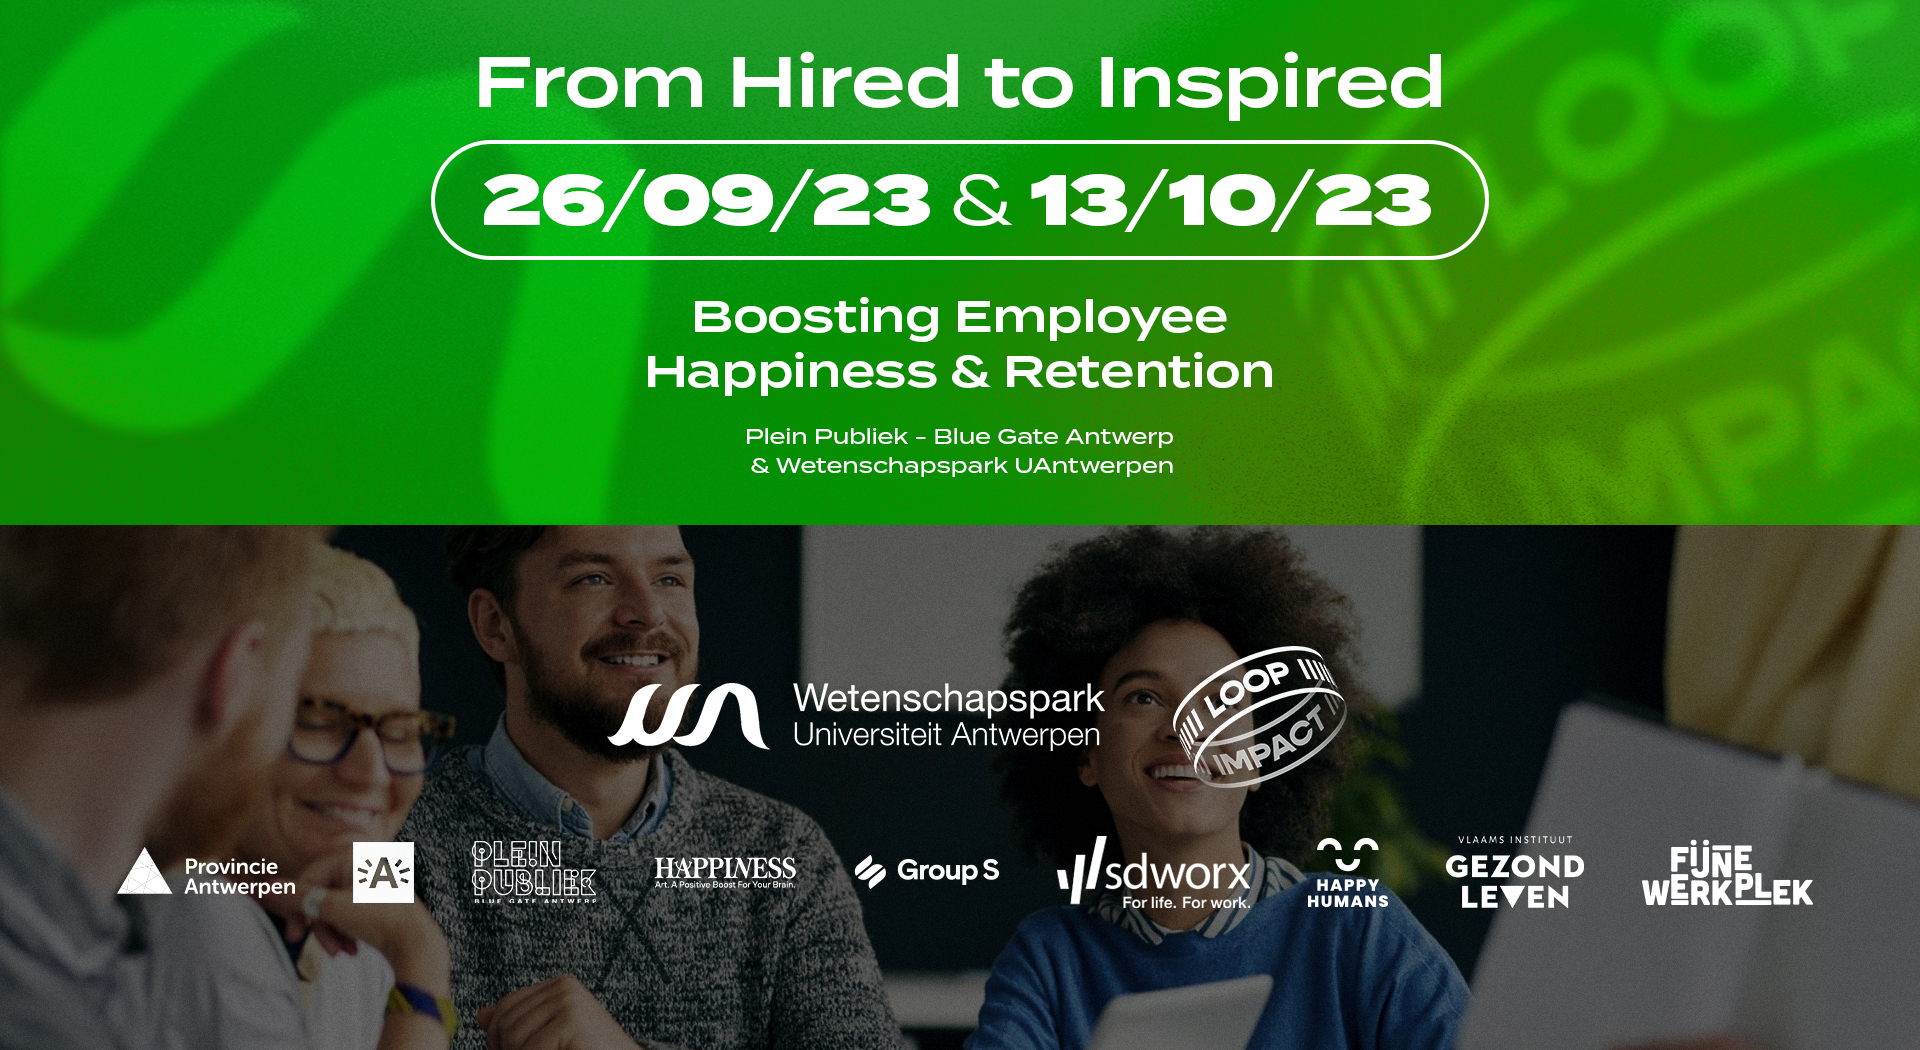 From hired to inspired